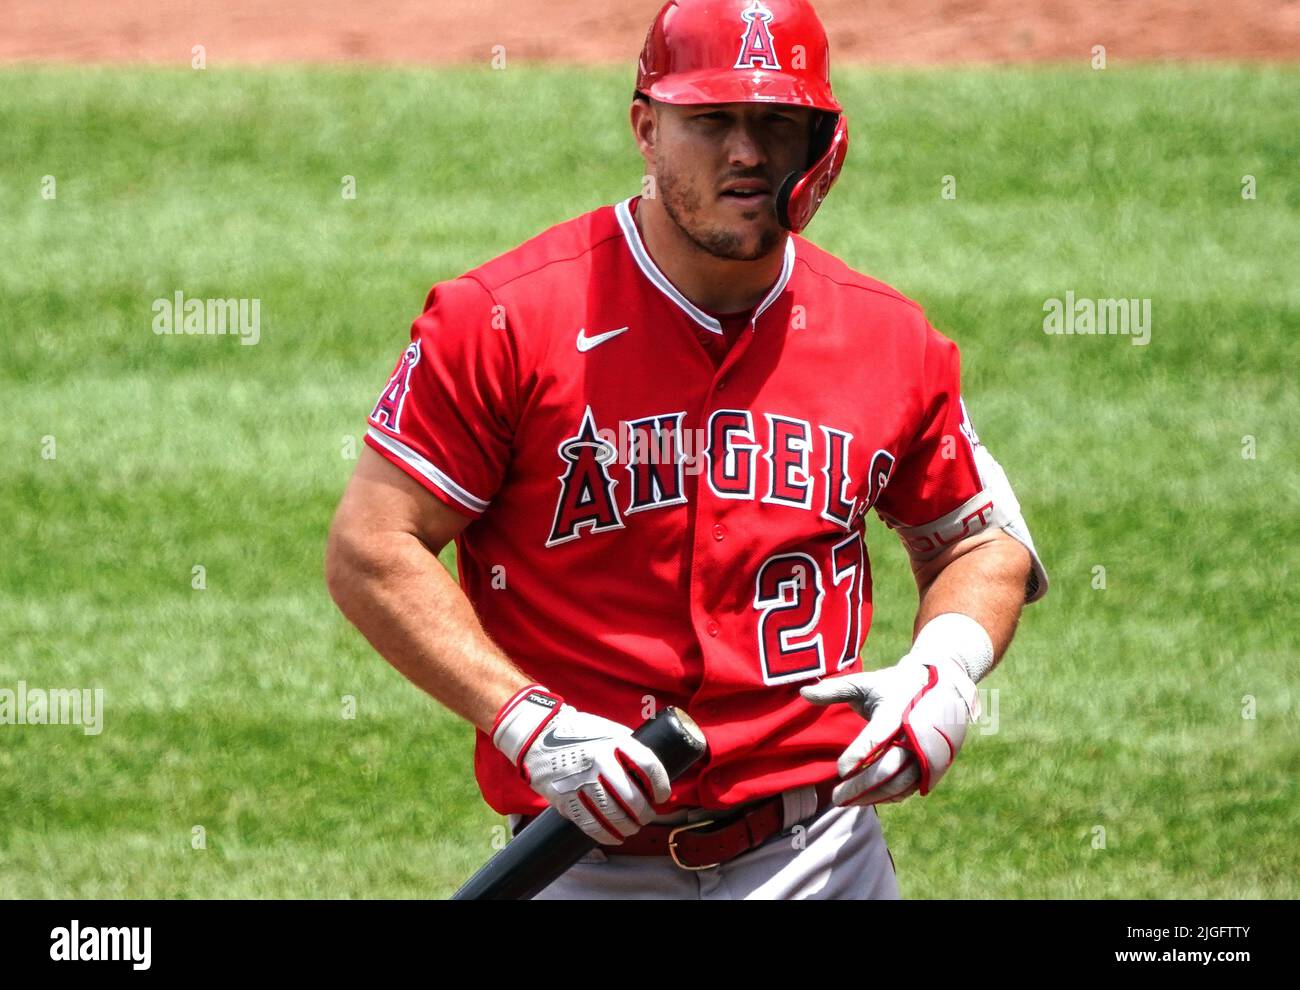 27 MIKE TROUT Los Angeles Angels of Anaheim MLB OF Red Mint